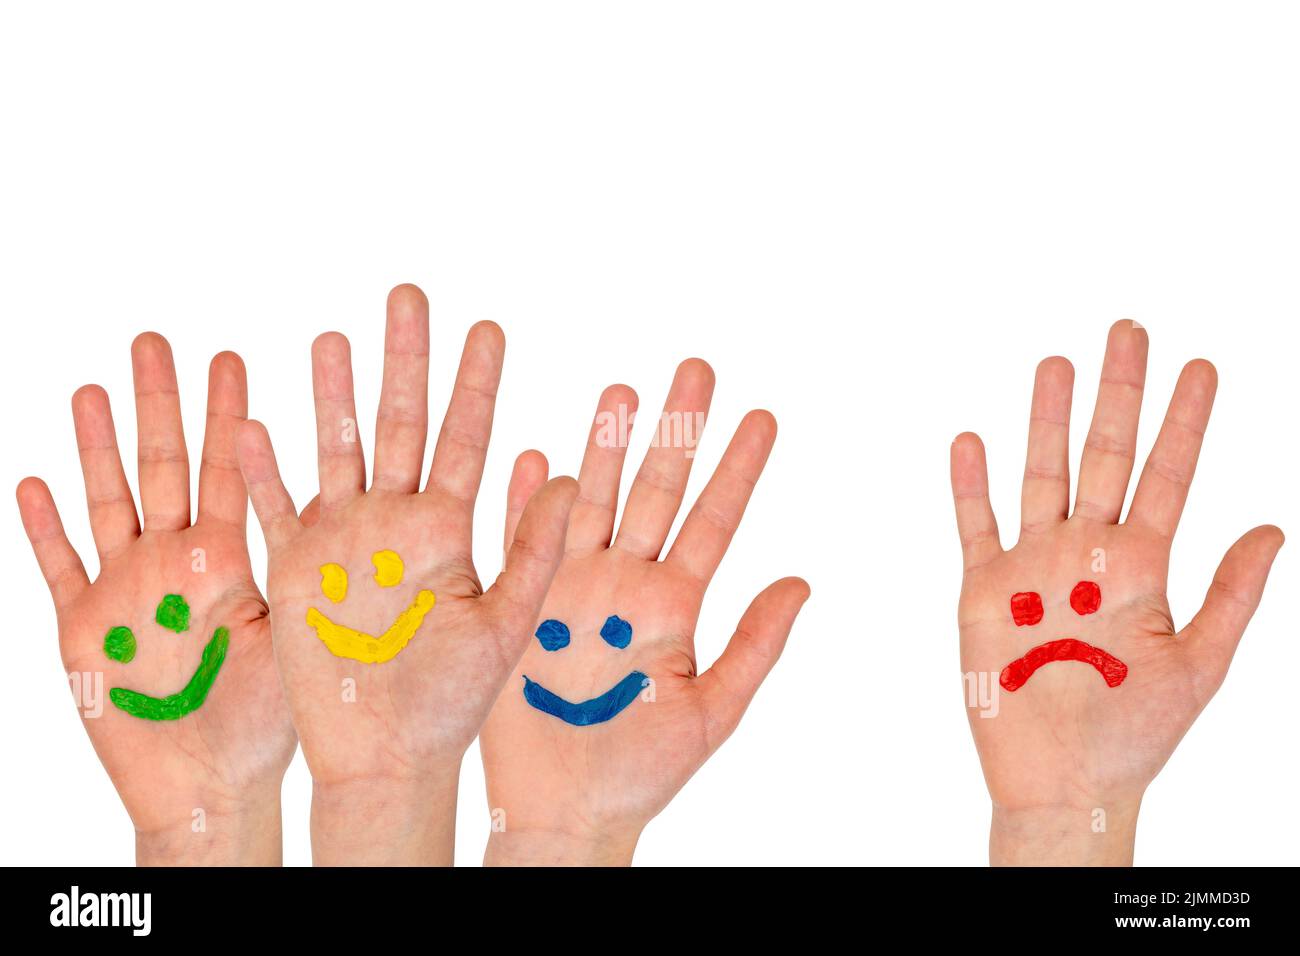 Hands with smiles and sadness pattern Stock Photo